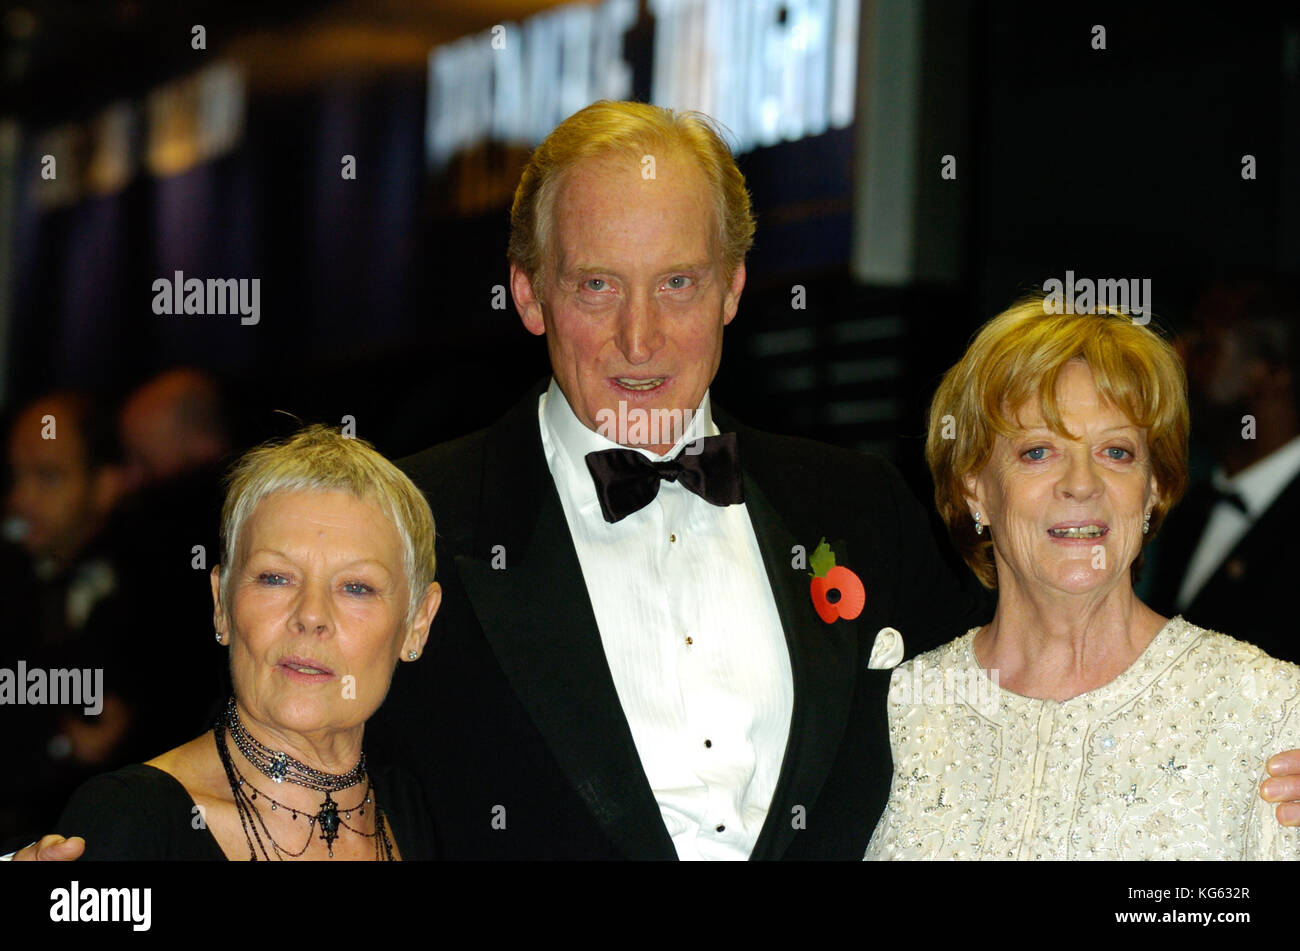 Charles Dance, Dame Judy Dench, Dame Maggie Smith attend a London red carpet film premiere 2004 London England UK Stock Photo